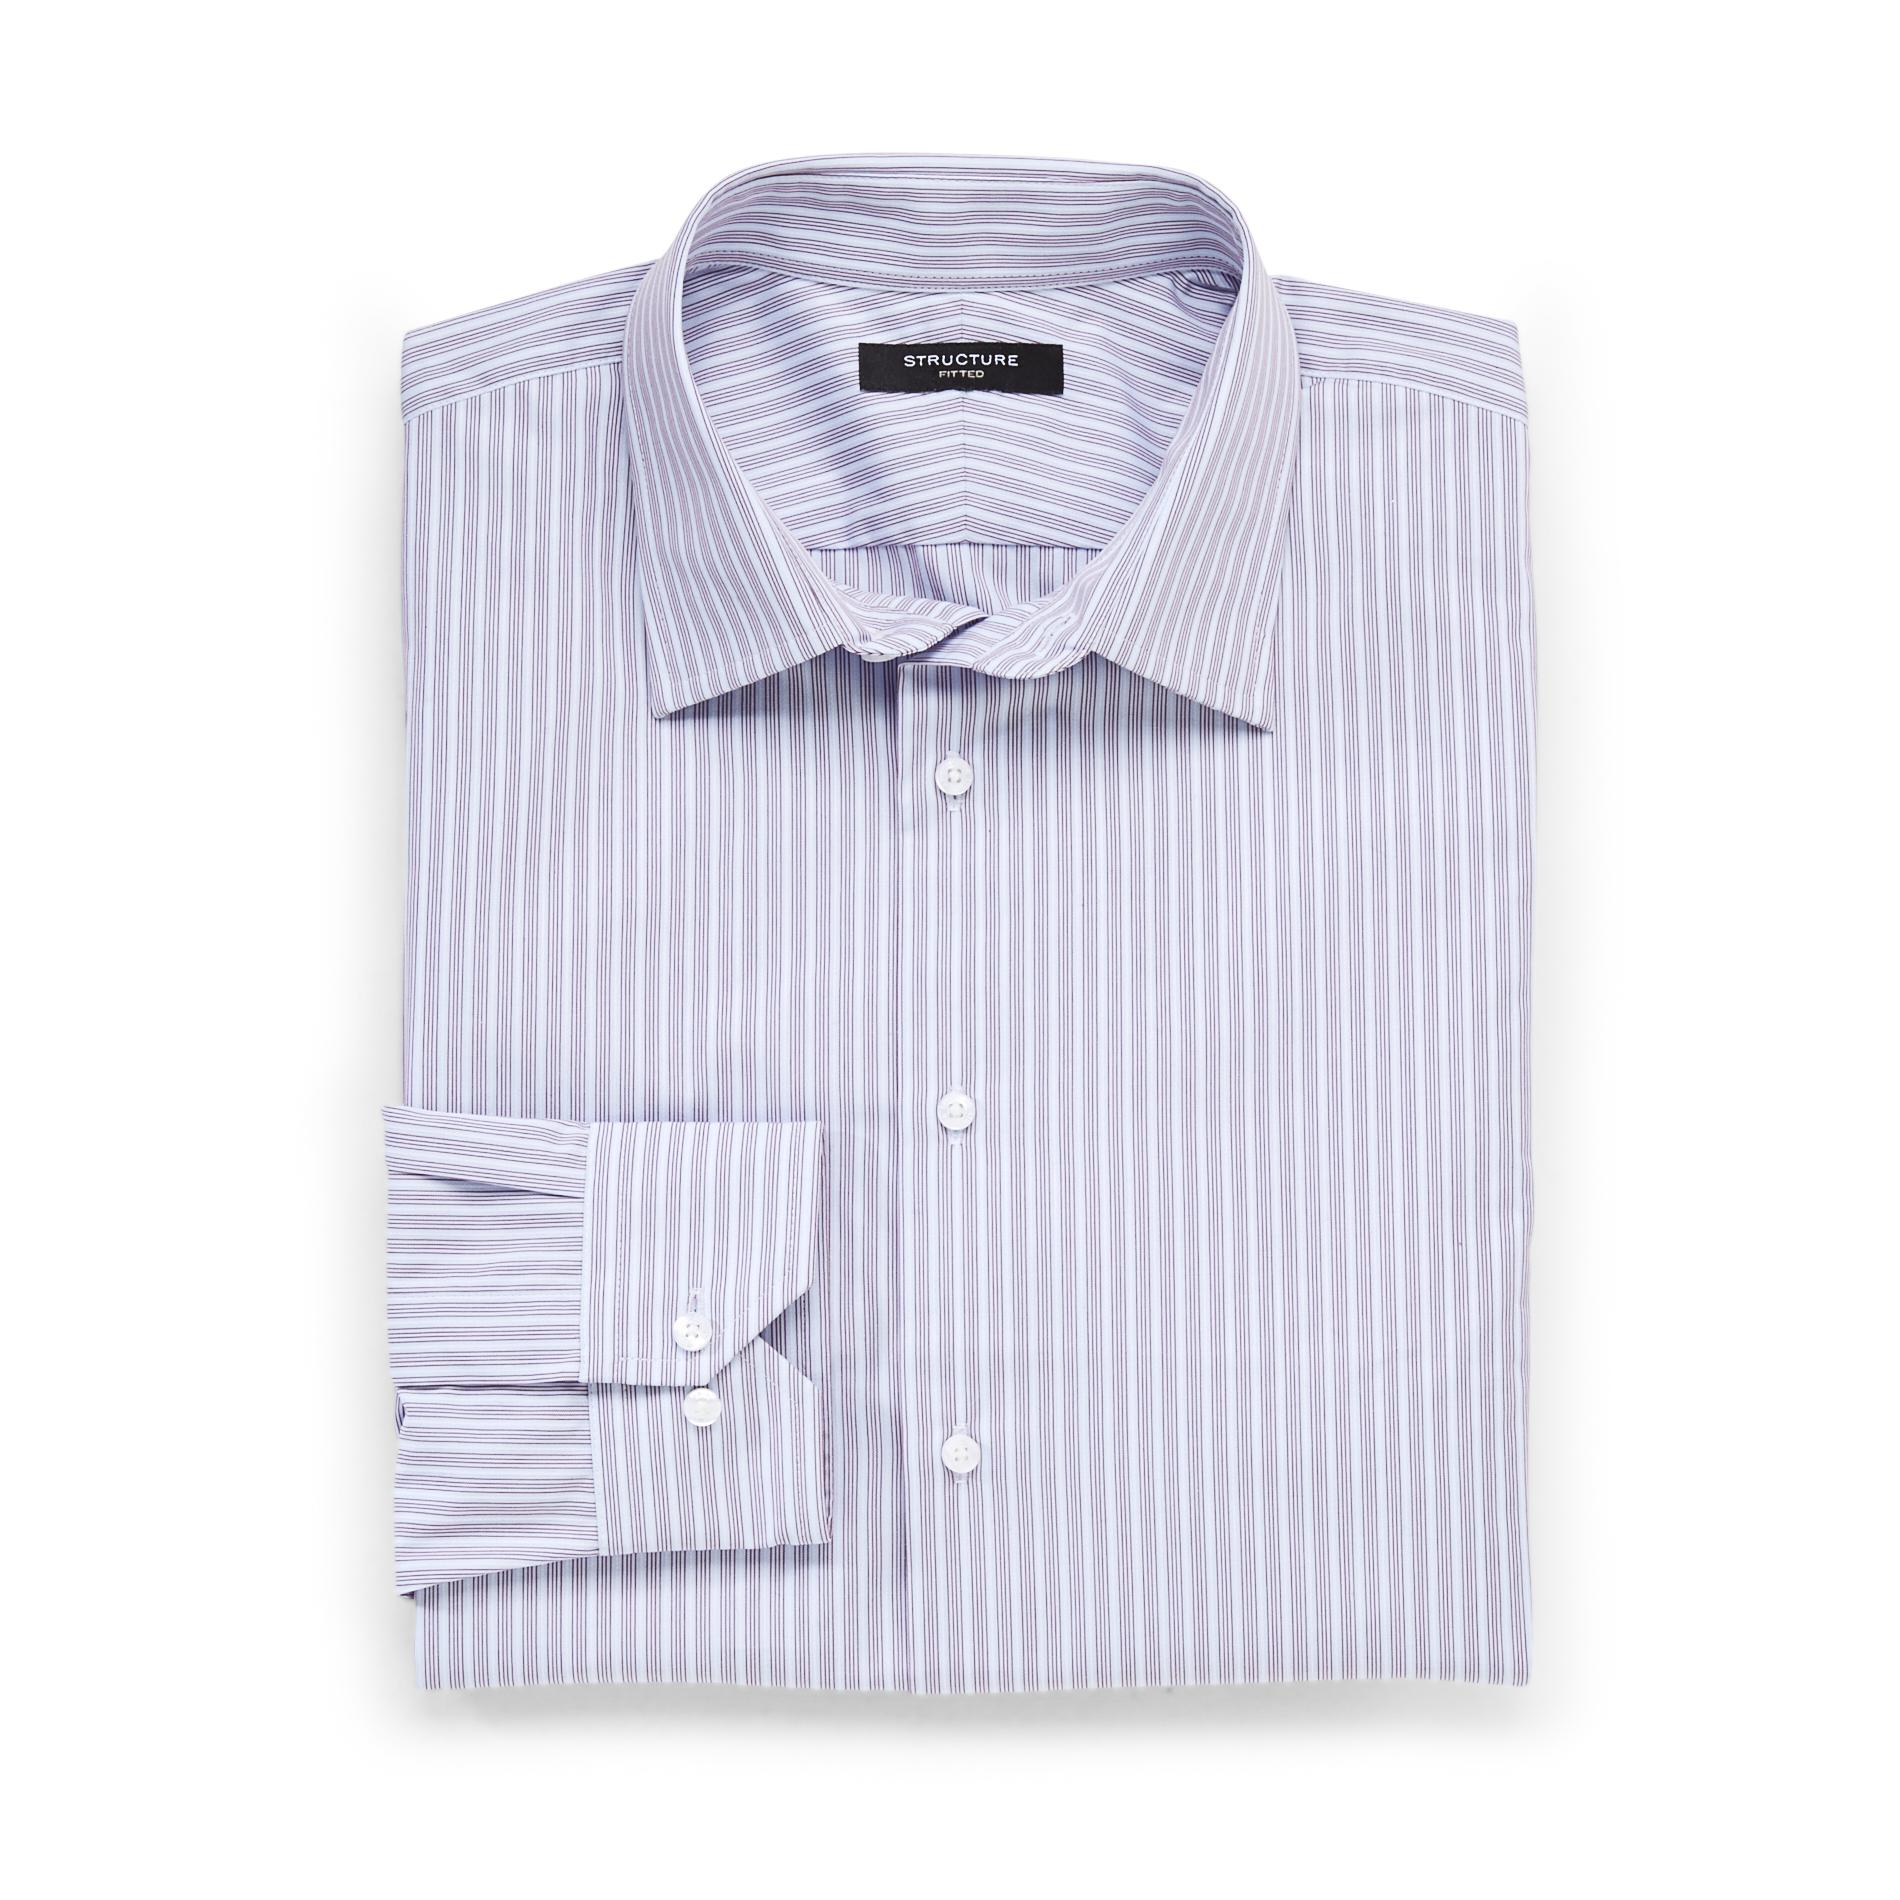 Structure Men's Fitted Dress Shirt - Striped